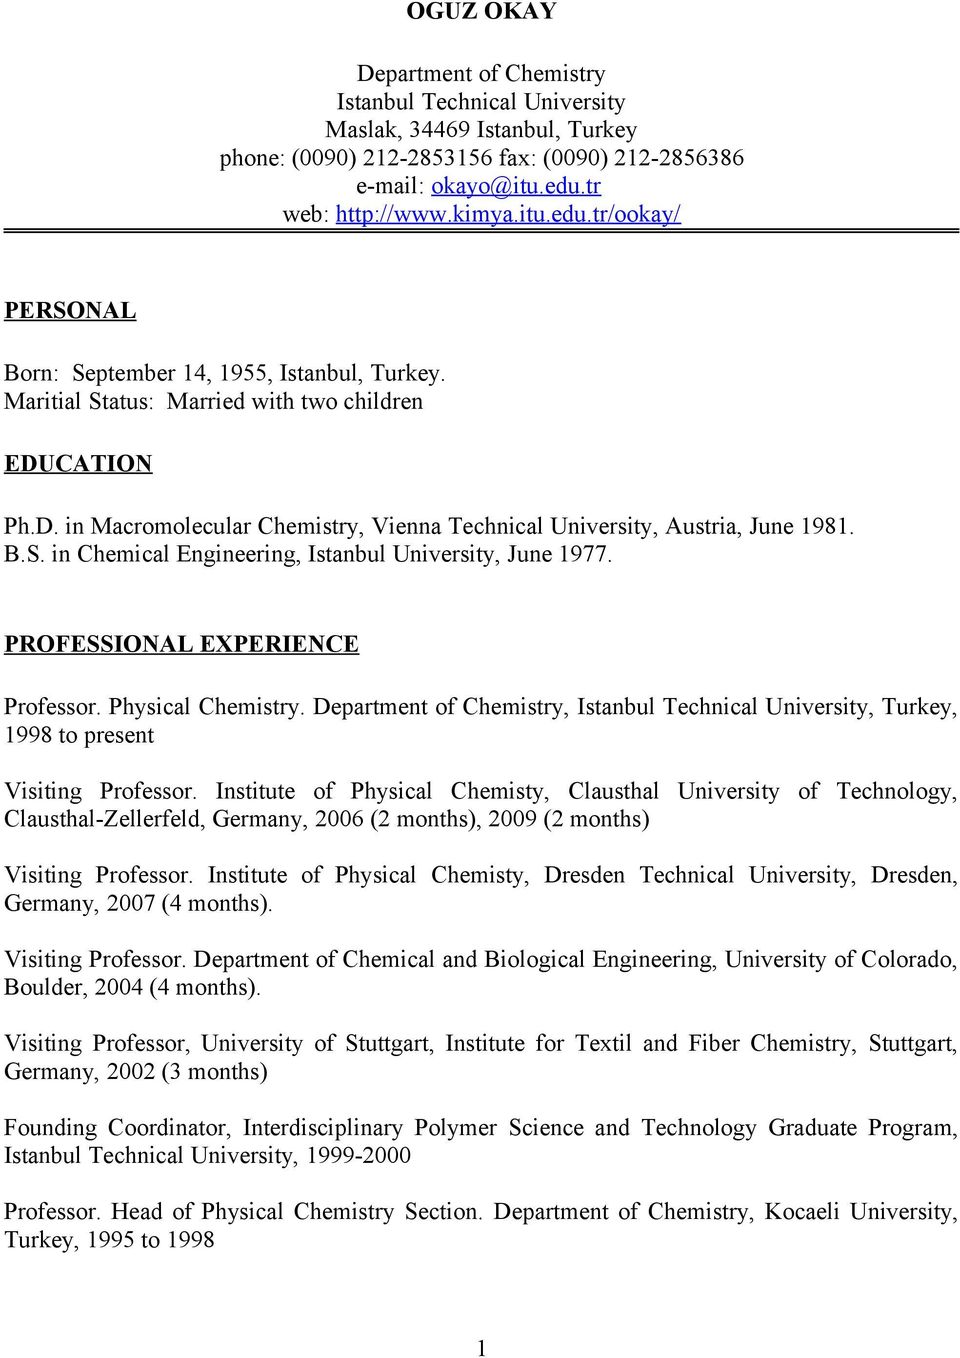 CATION Ph.D. in Macromolecular Chemistry, Vienna Technical University, Austria, June 1981. B.S. in Chemical Engineering, Istanbul University, June 1977. PROFESSIONAL EXPERIENCE Professor.